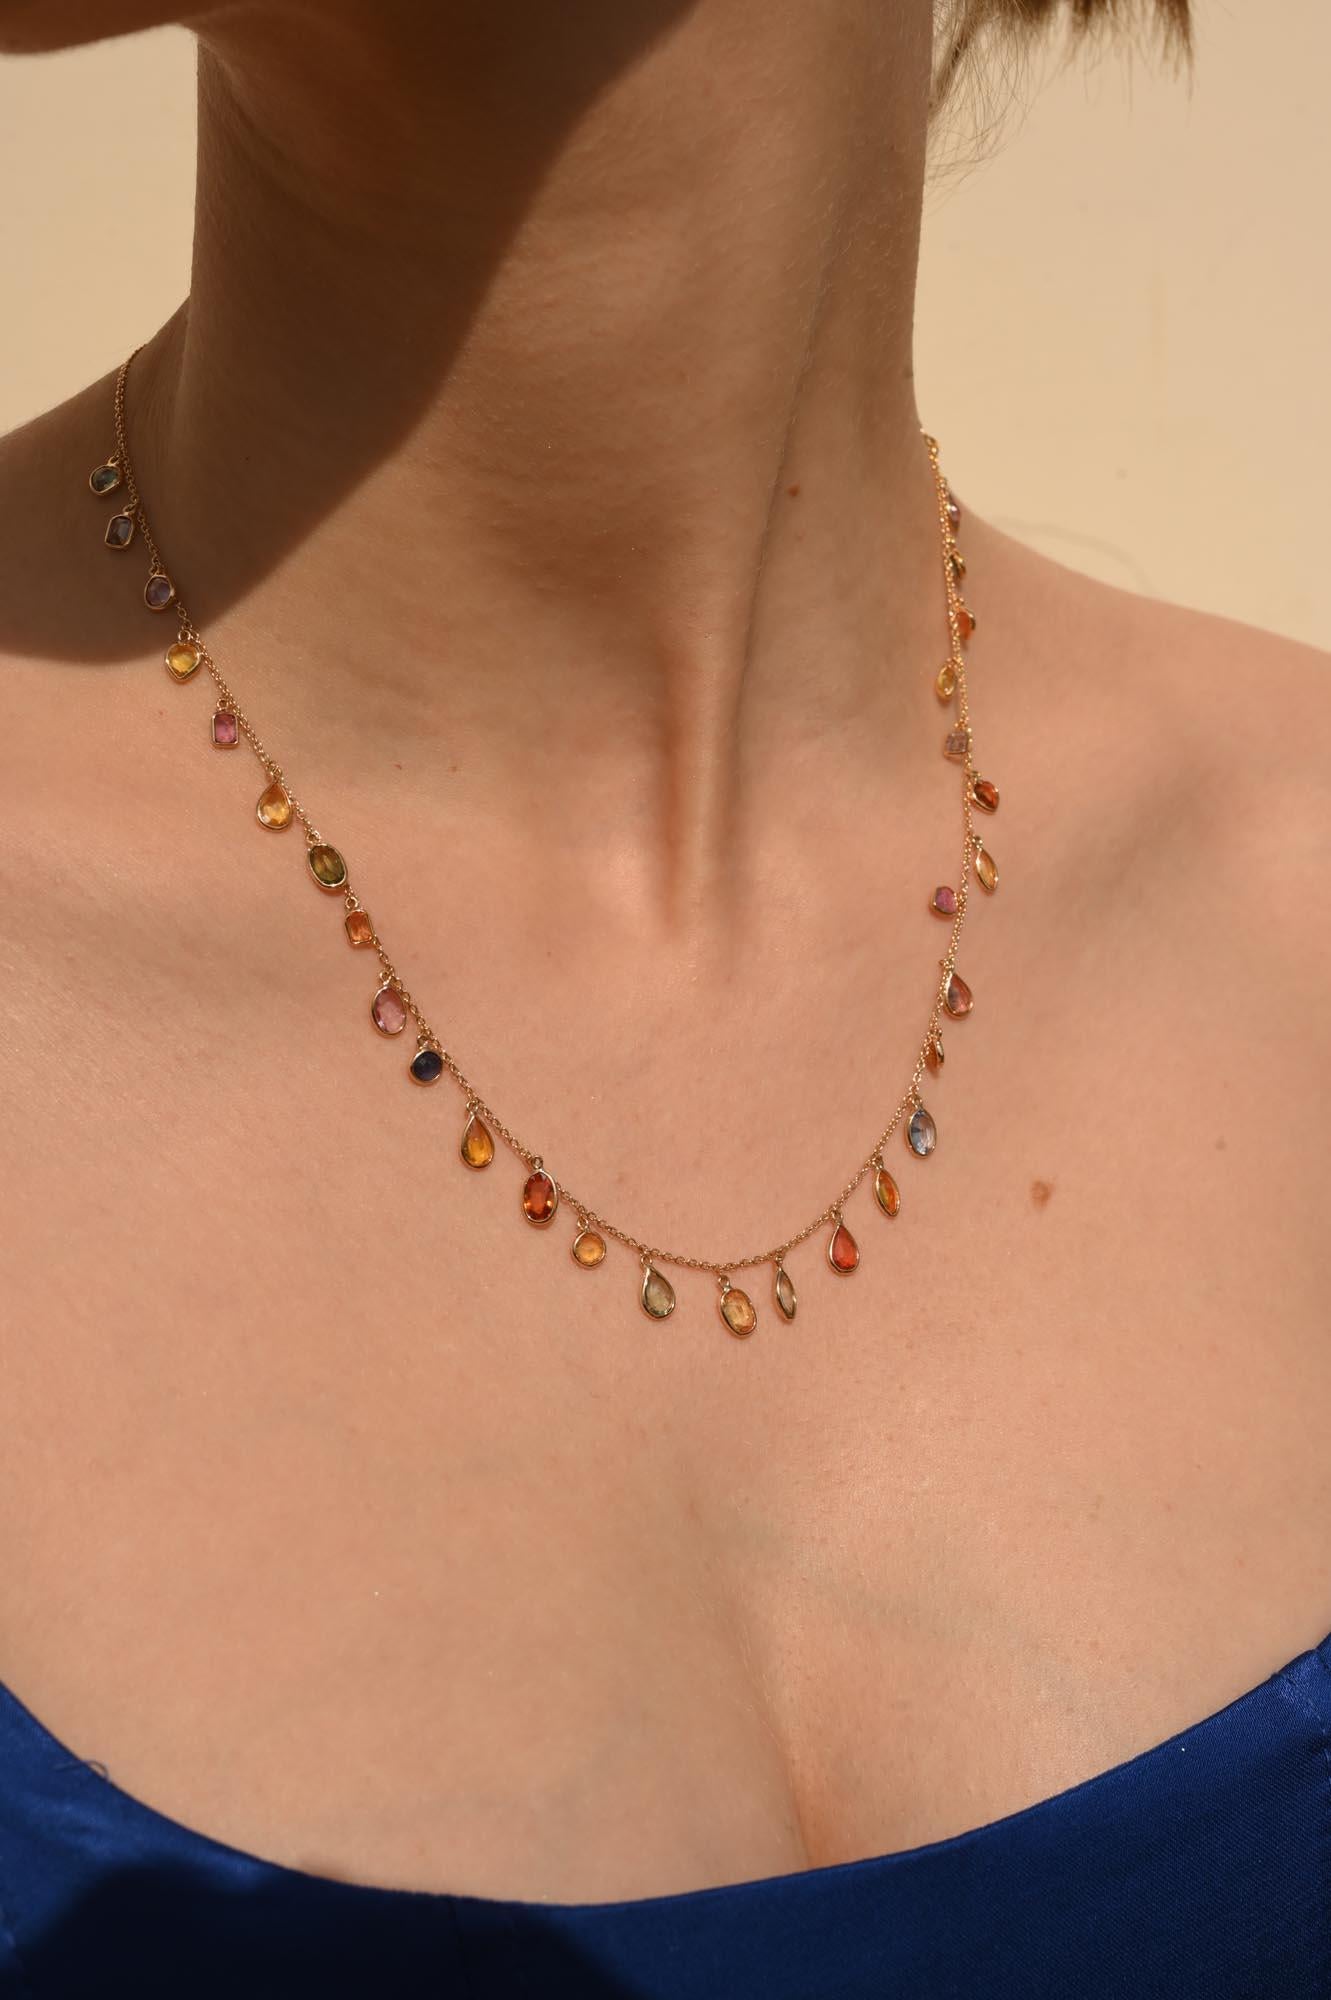 Modern Colorful 18k Yellow Gold Dangling Multi Sapphire Chain Necklace, Bridesmaid Gift For Sale